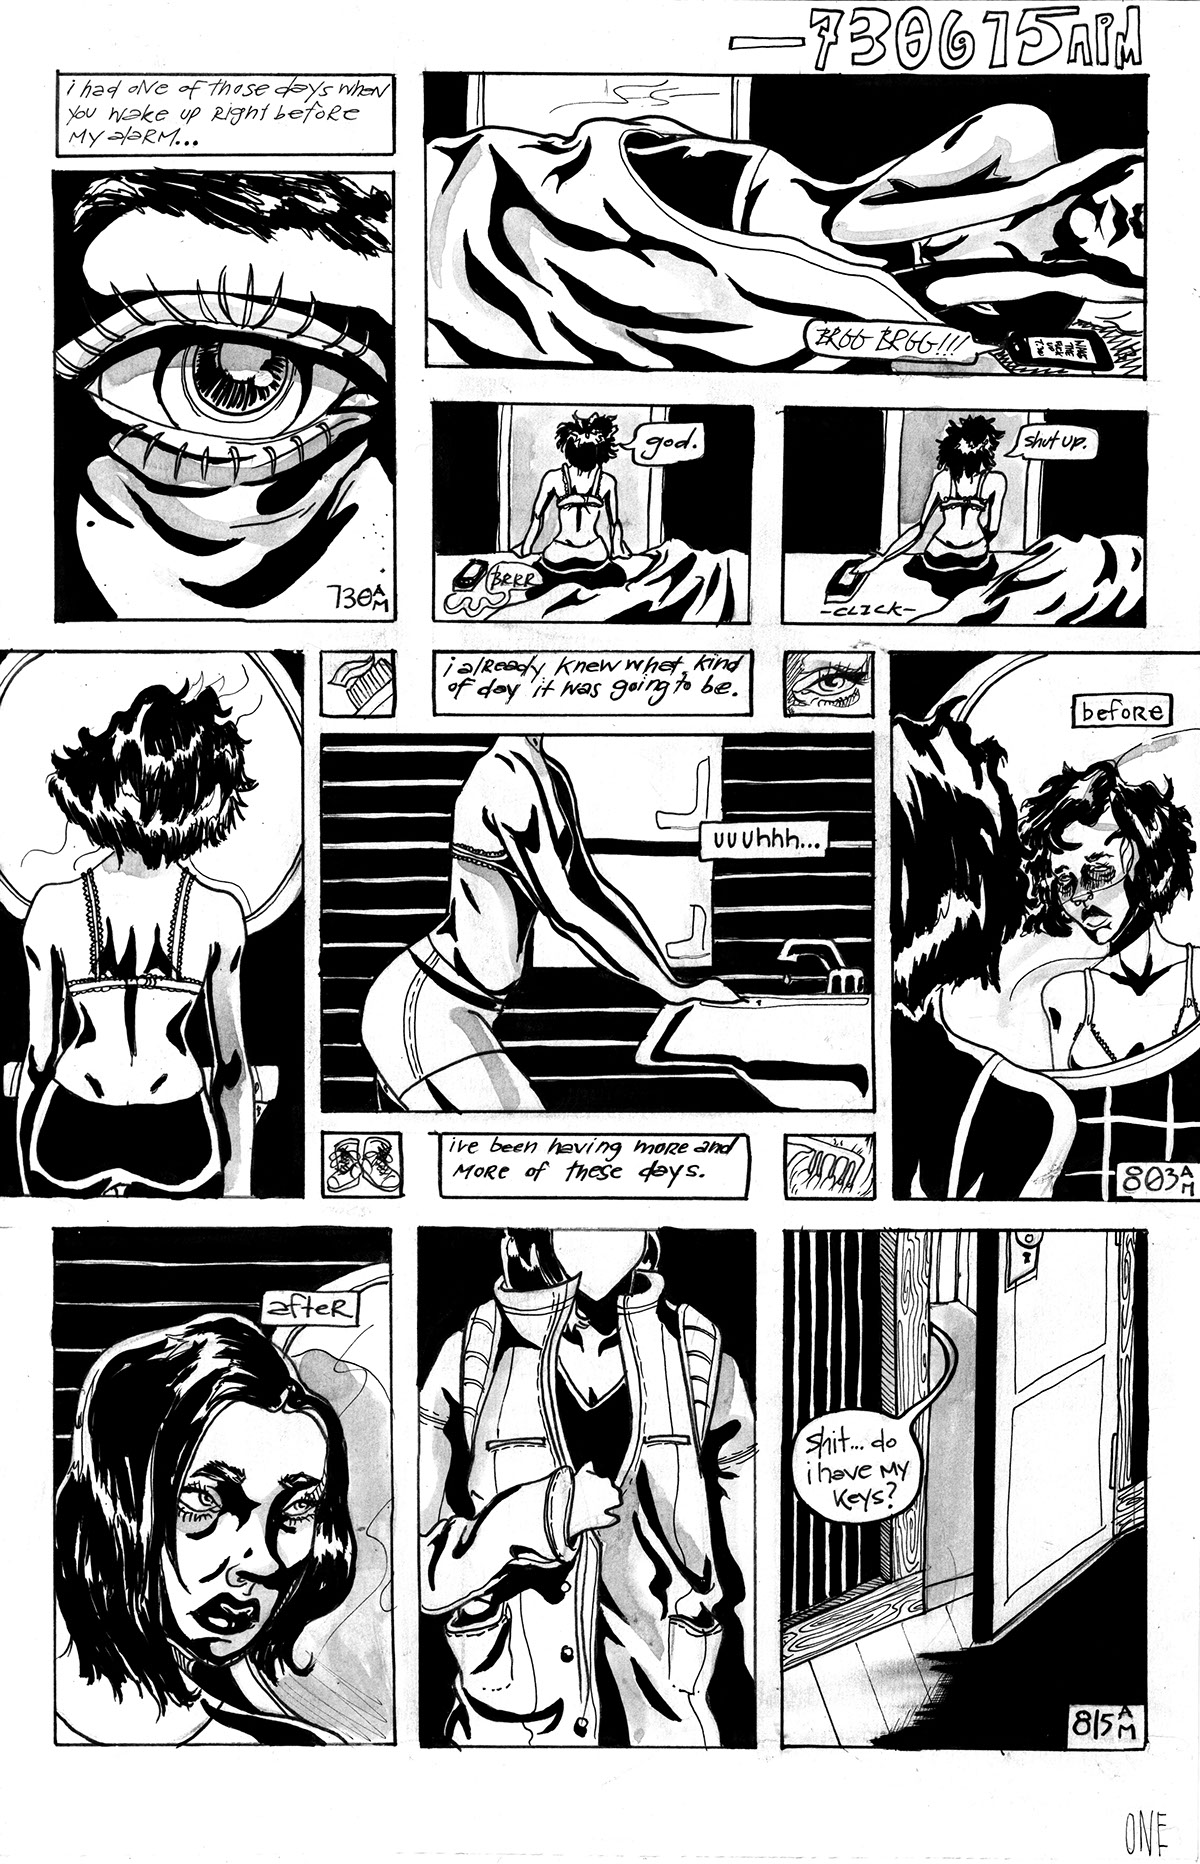 comics One day sequence ink pen photoshop black and white graphic Graphic Novel